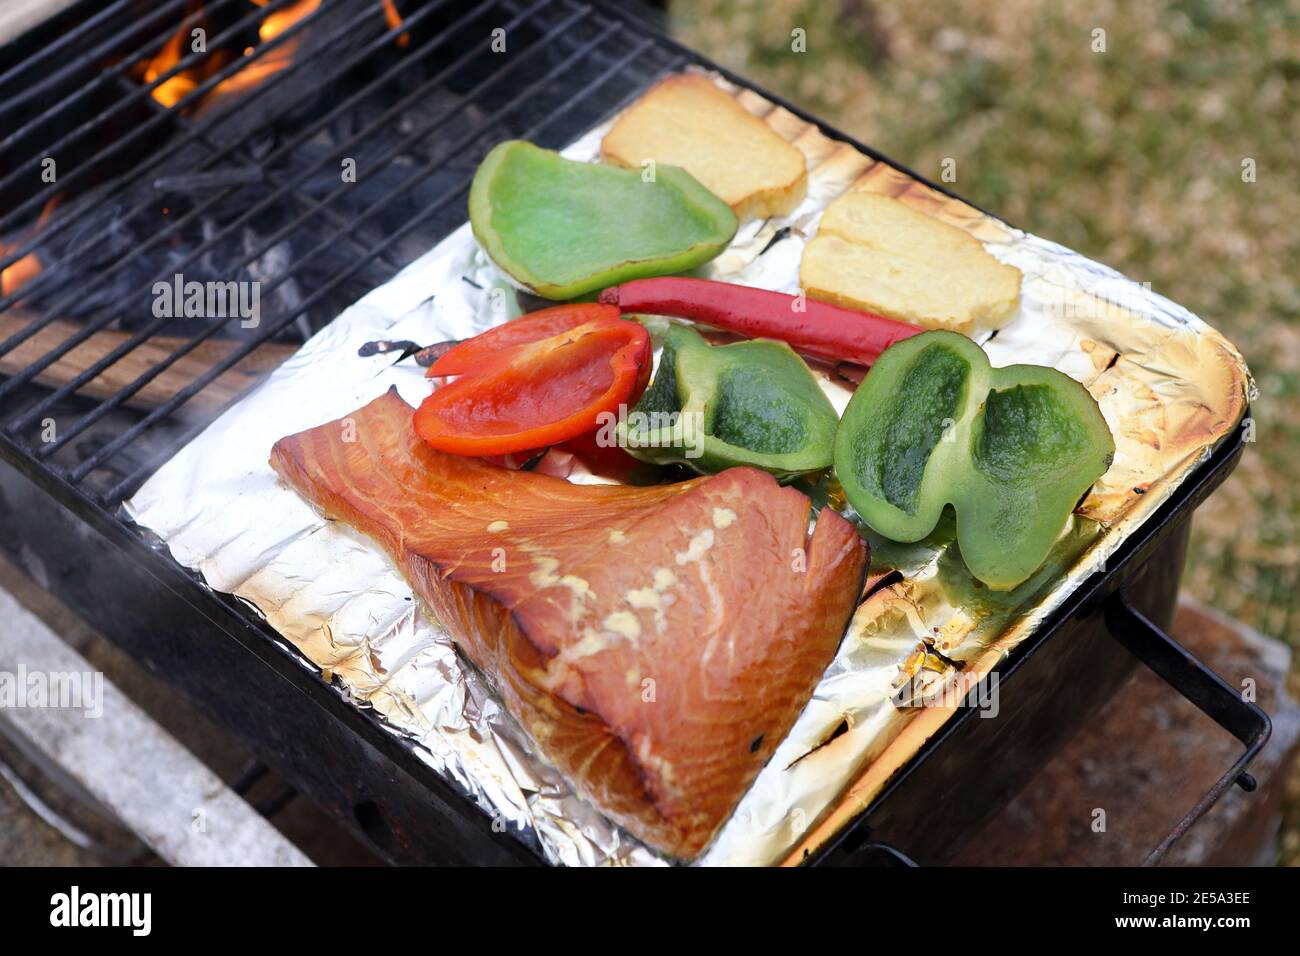 Smoking salmon, peppers, chilli and cheese on a BBQ Stock Photo